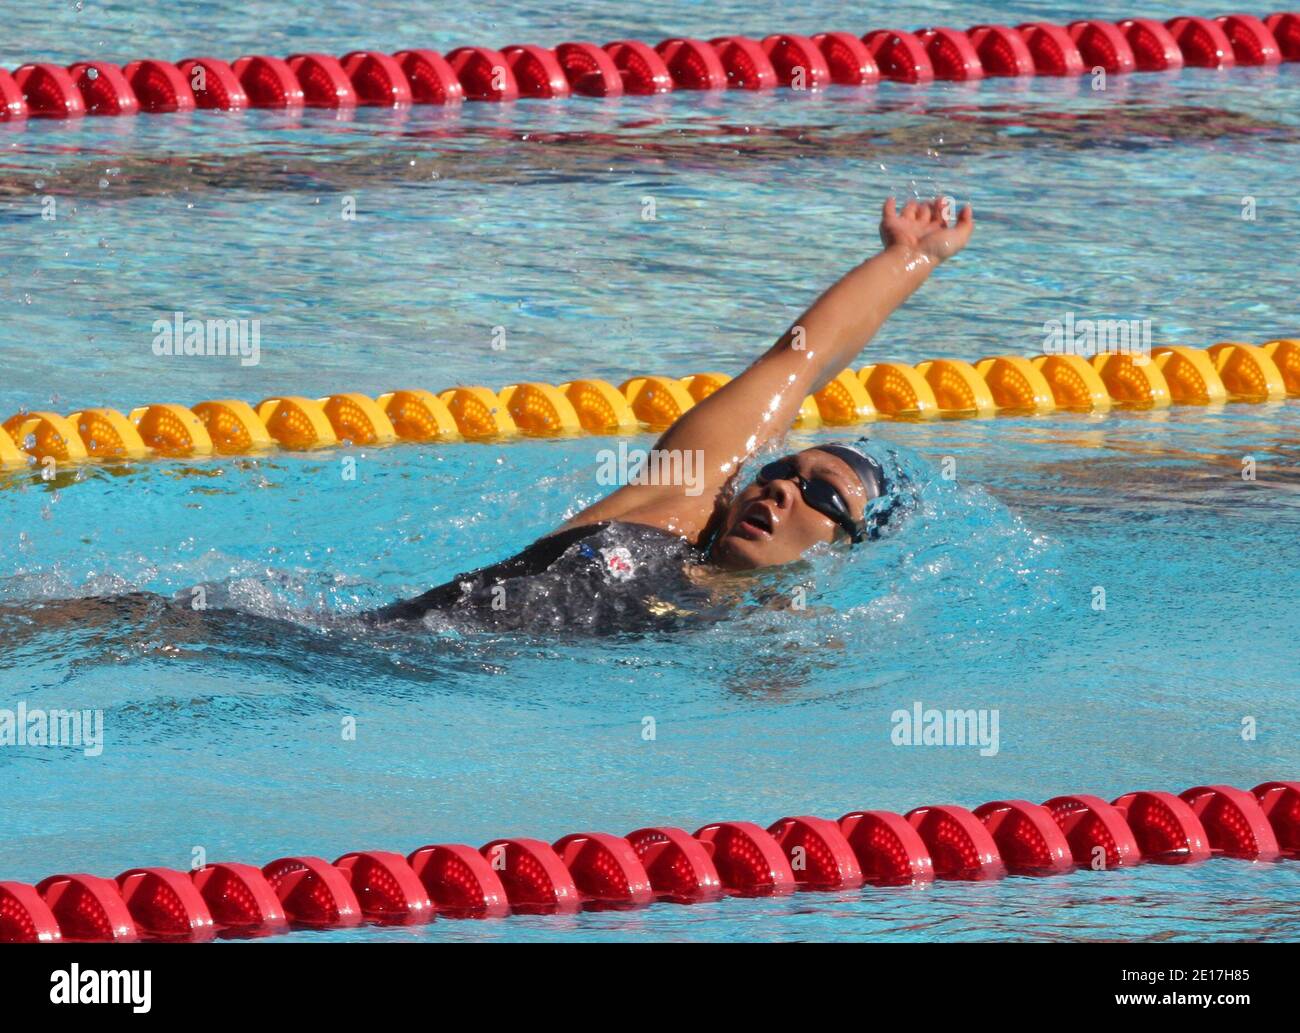 Japanese Swimmer's Shiho Sakai during the XXIV International Meeting Arena Swimming, Day two, at the Arlette Franco Swimming Pool Center in Canet-en-Roussillon near Perpignan, France on Juny 9, 2011. Photo by Michel Clementz/ABACAPRESS.COM Stock Photo